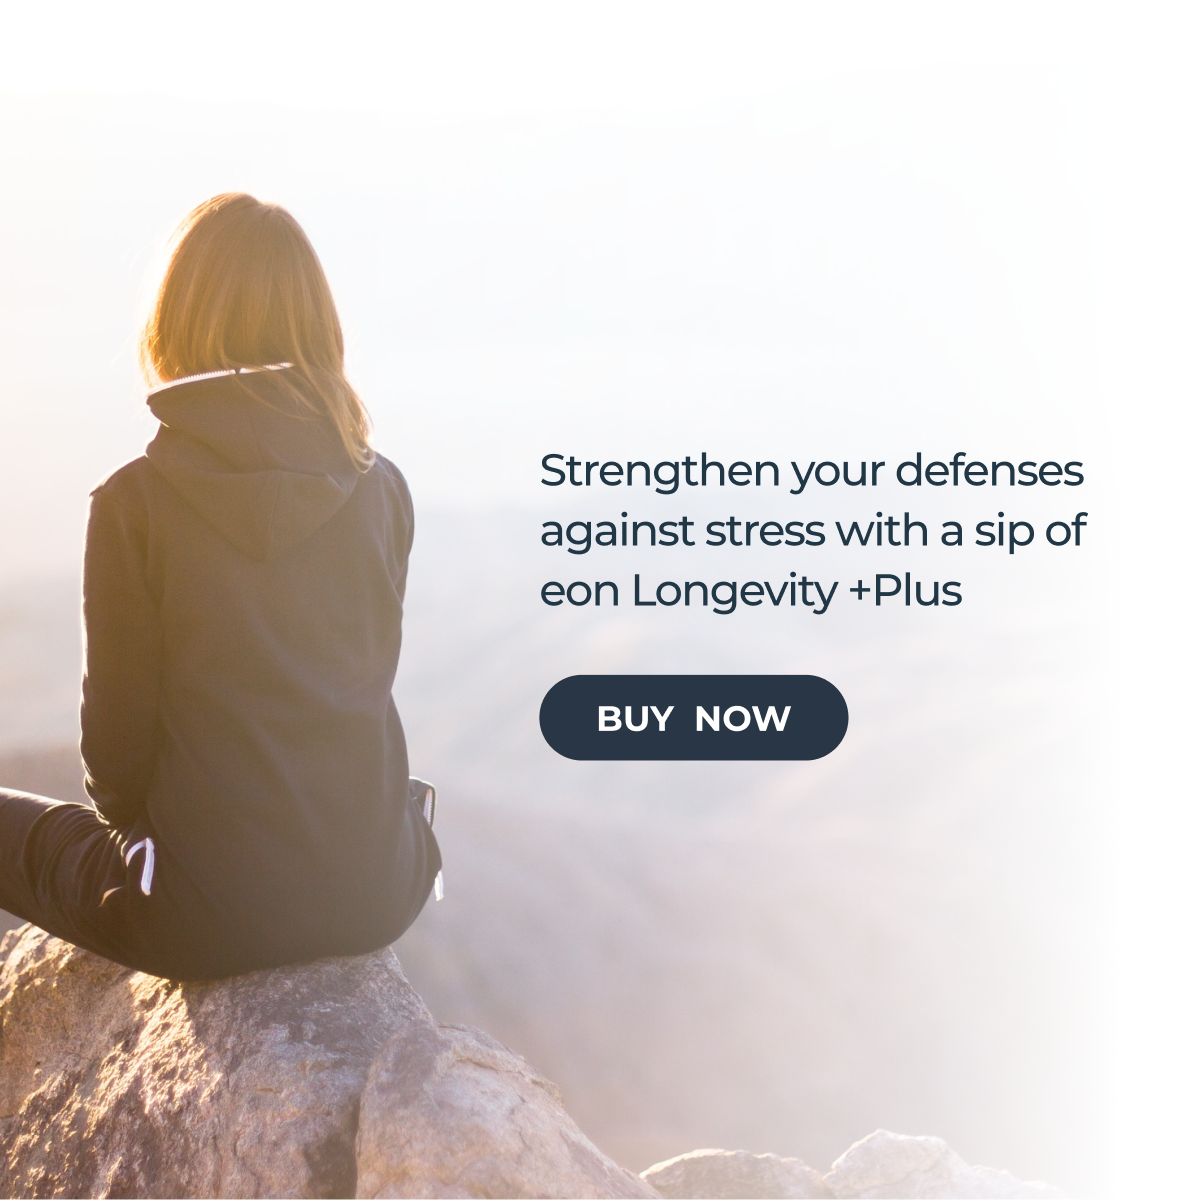 Strengthen your defenses against stress with a sip of eon Longevity +Plus